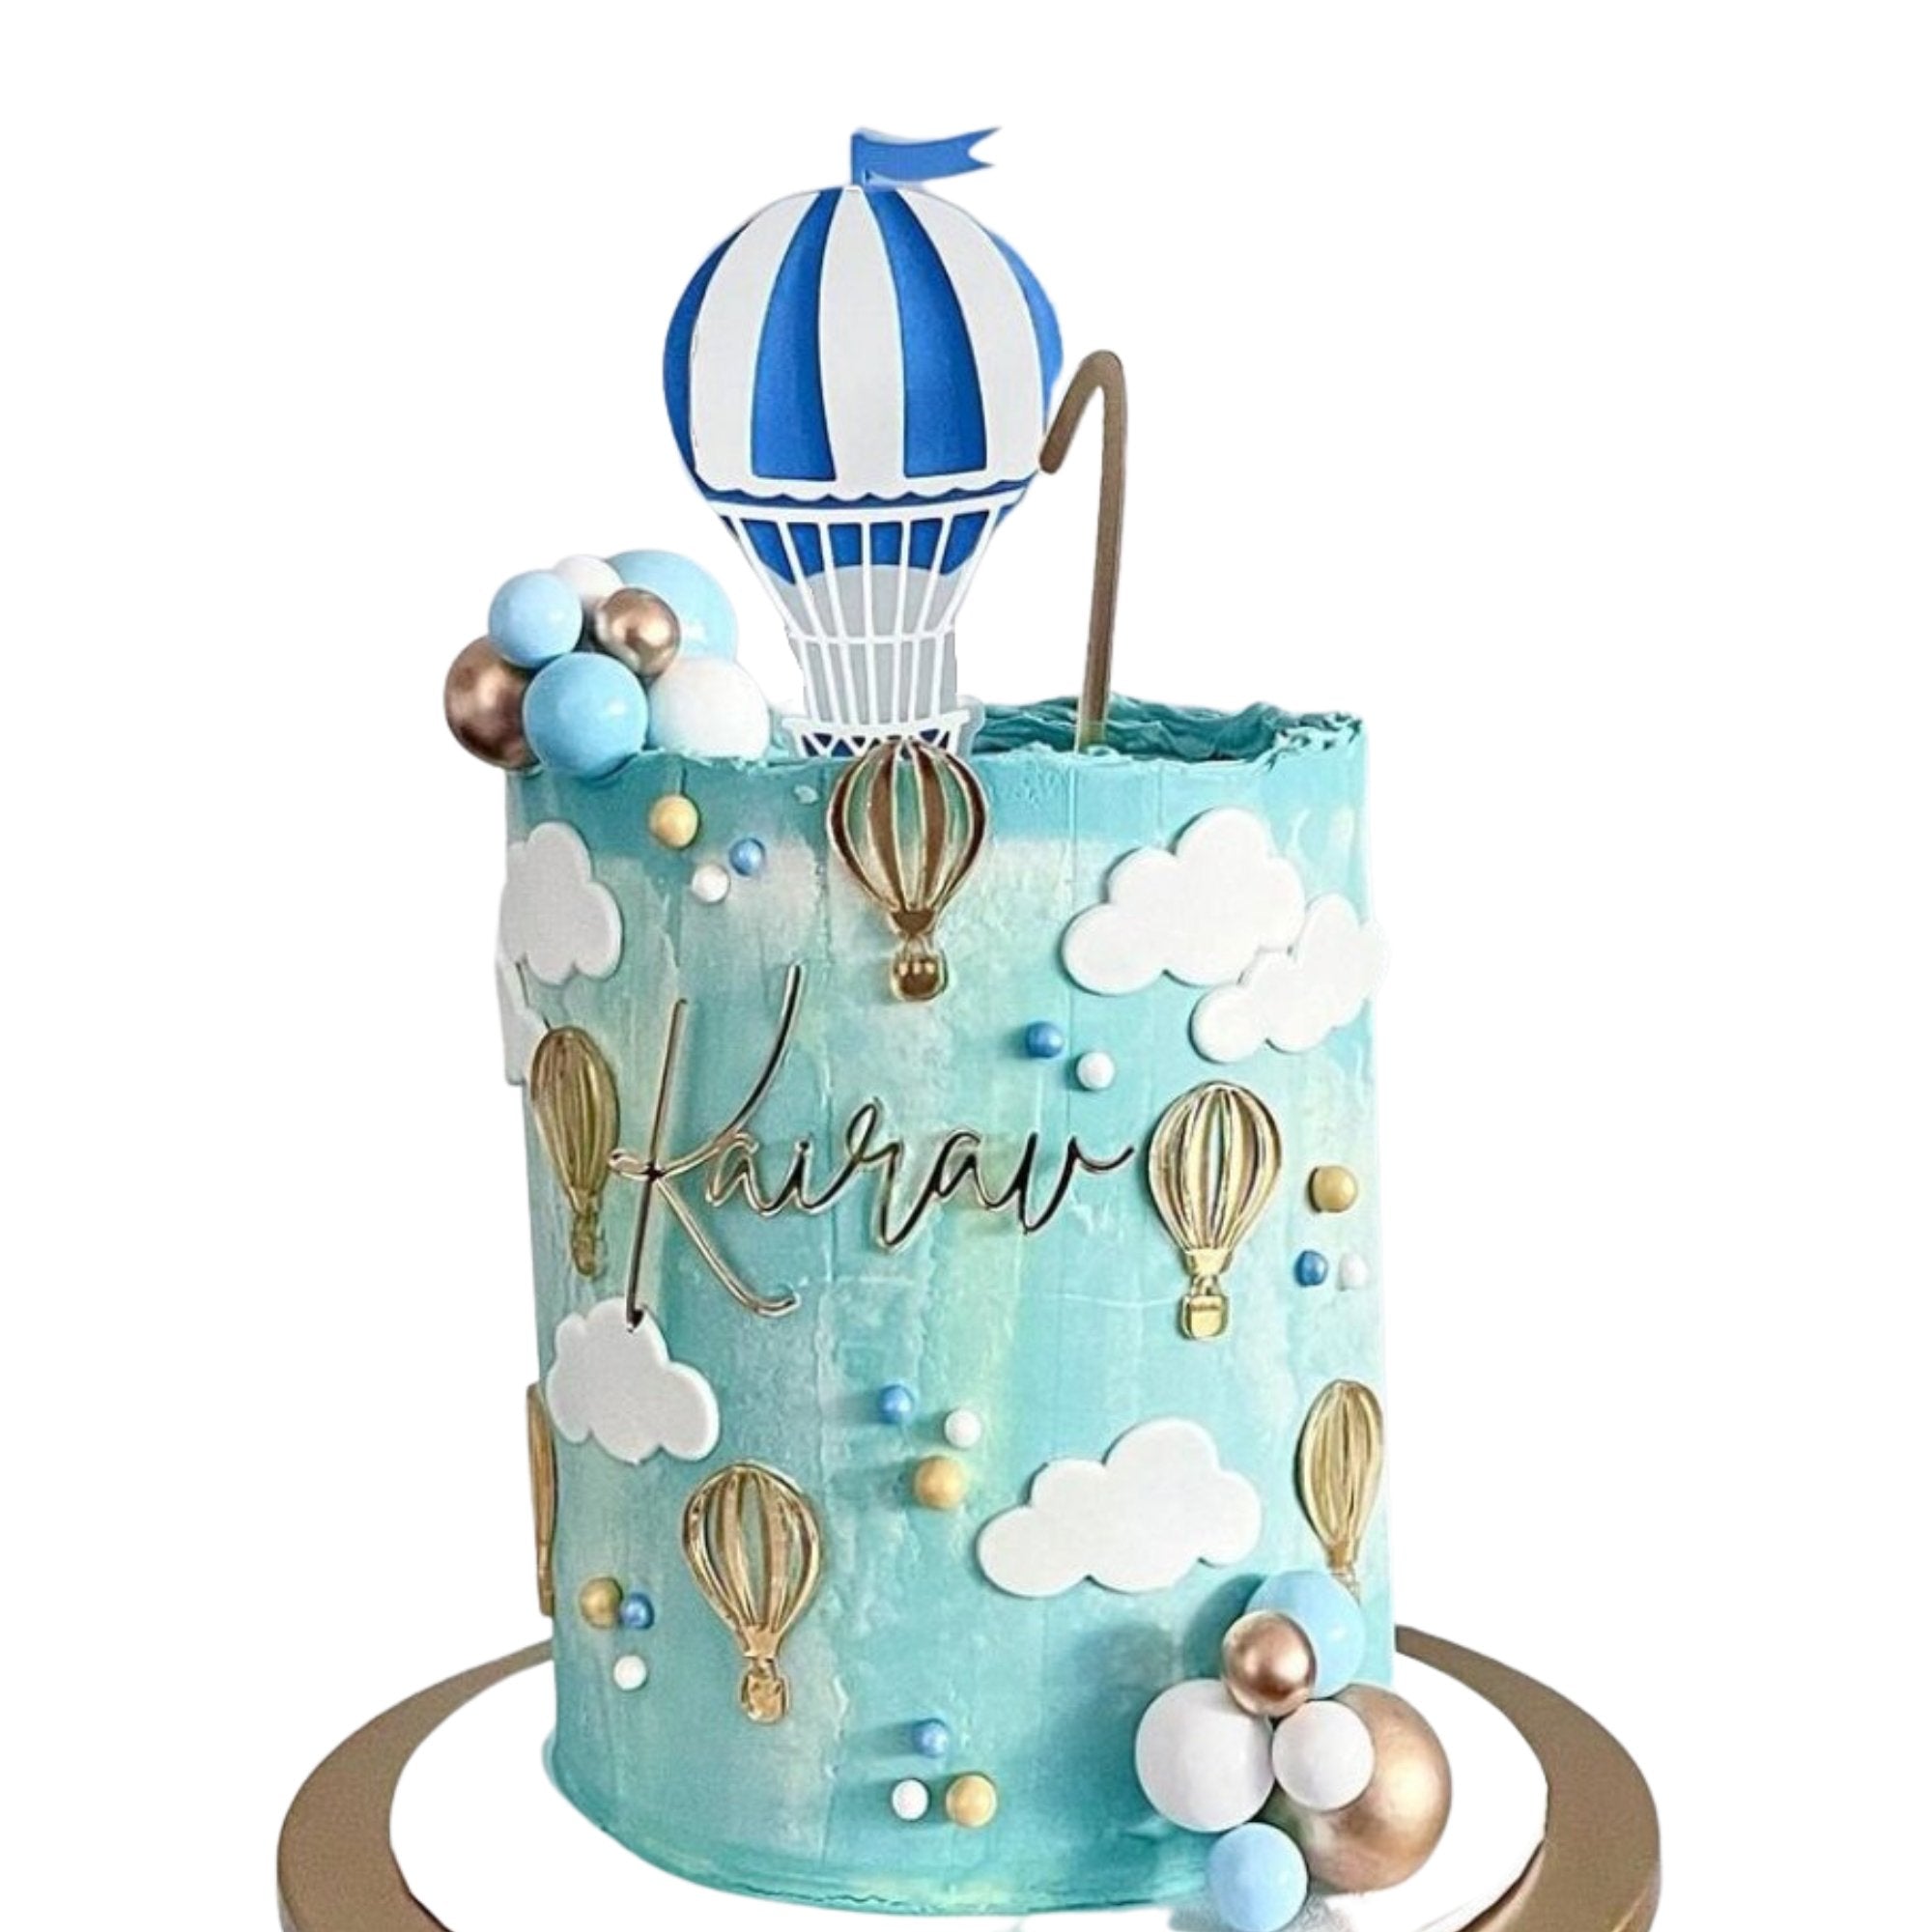 Hot Air Balloon Cake Topper and Mini Balloon Charms - Cake Topper Warehouse